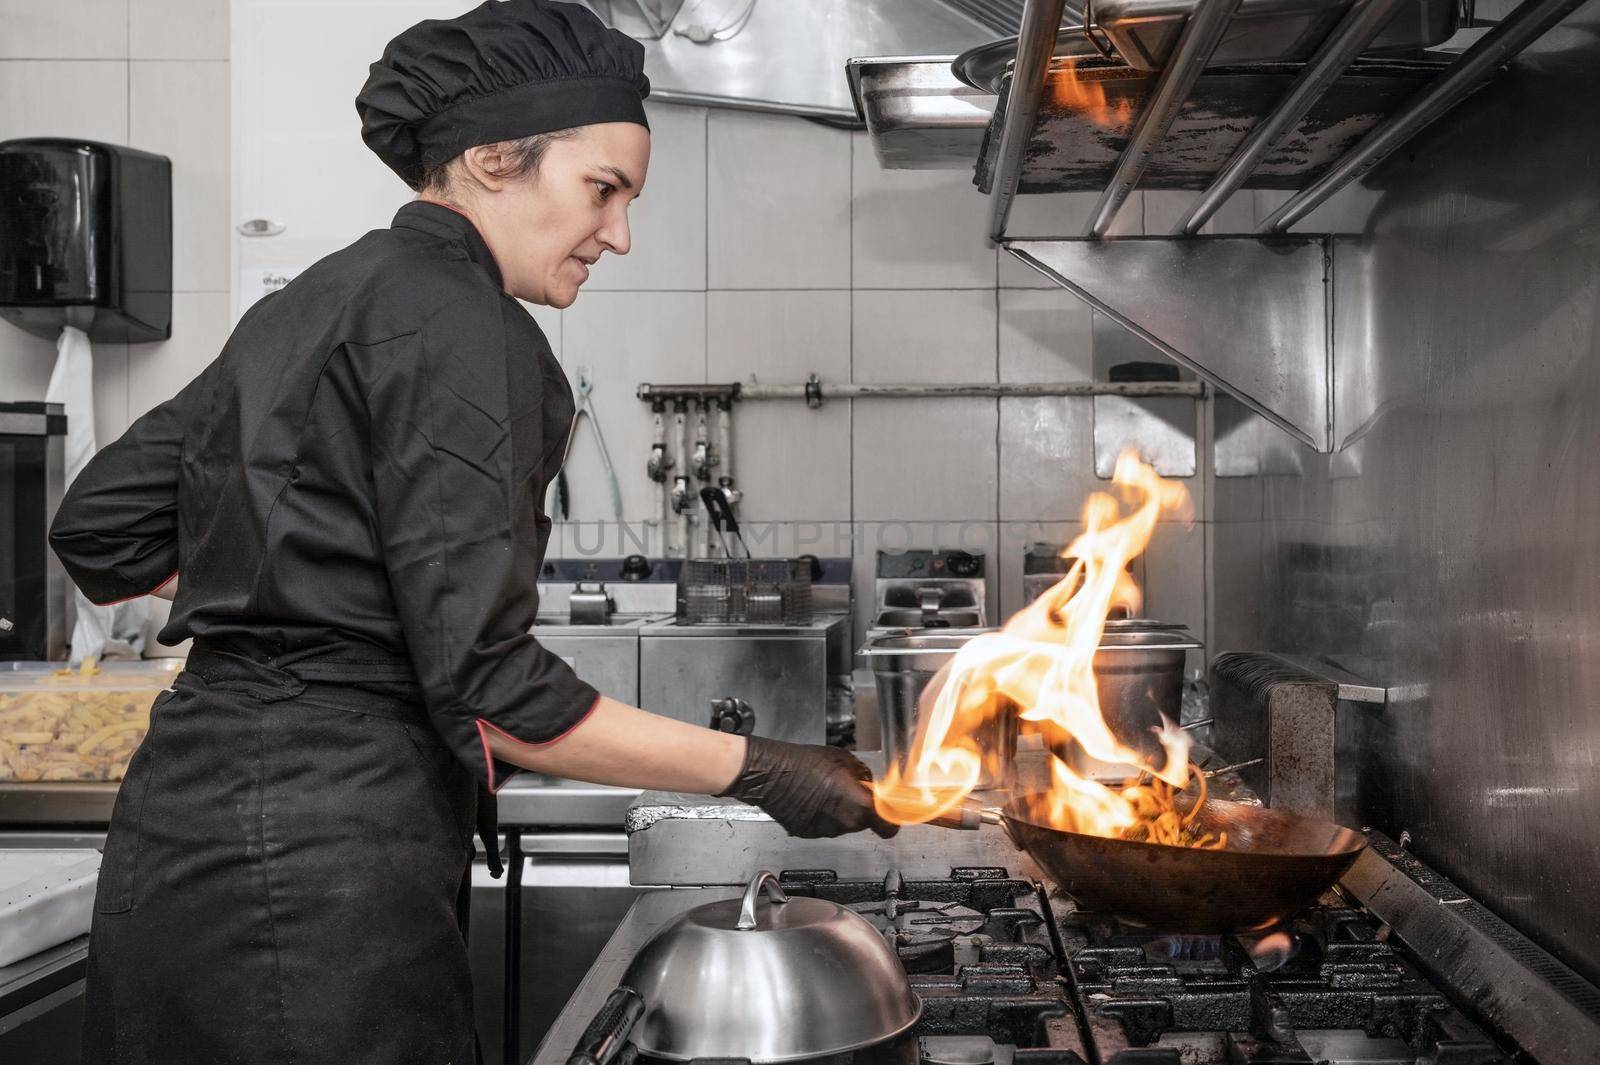 Woman Chef Cooking wok in the Kitchen. Cooking flaming wok with vegetables in the commercial kitchen. High quality photography.